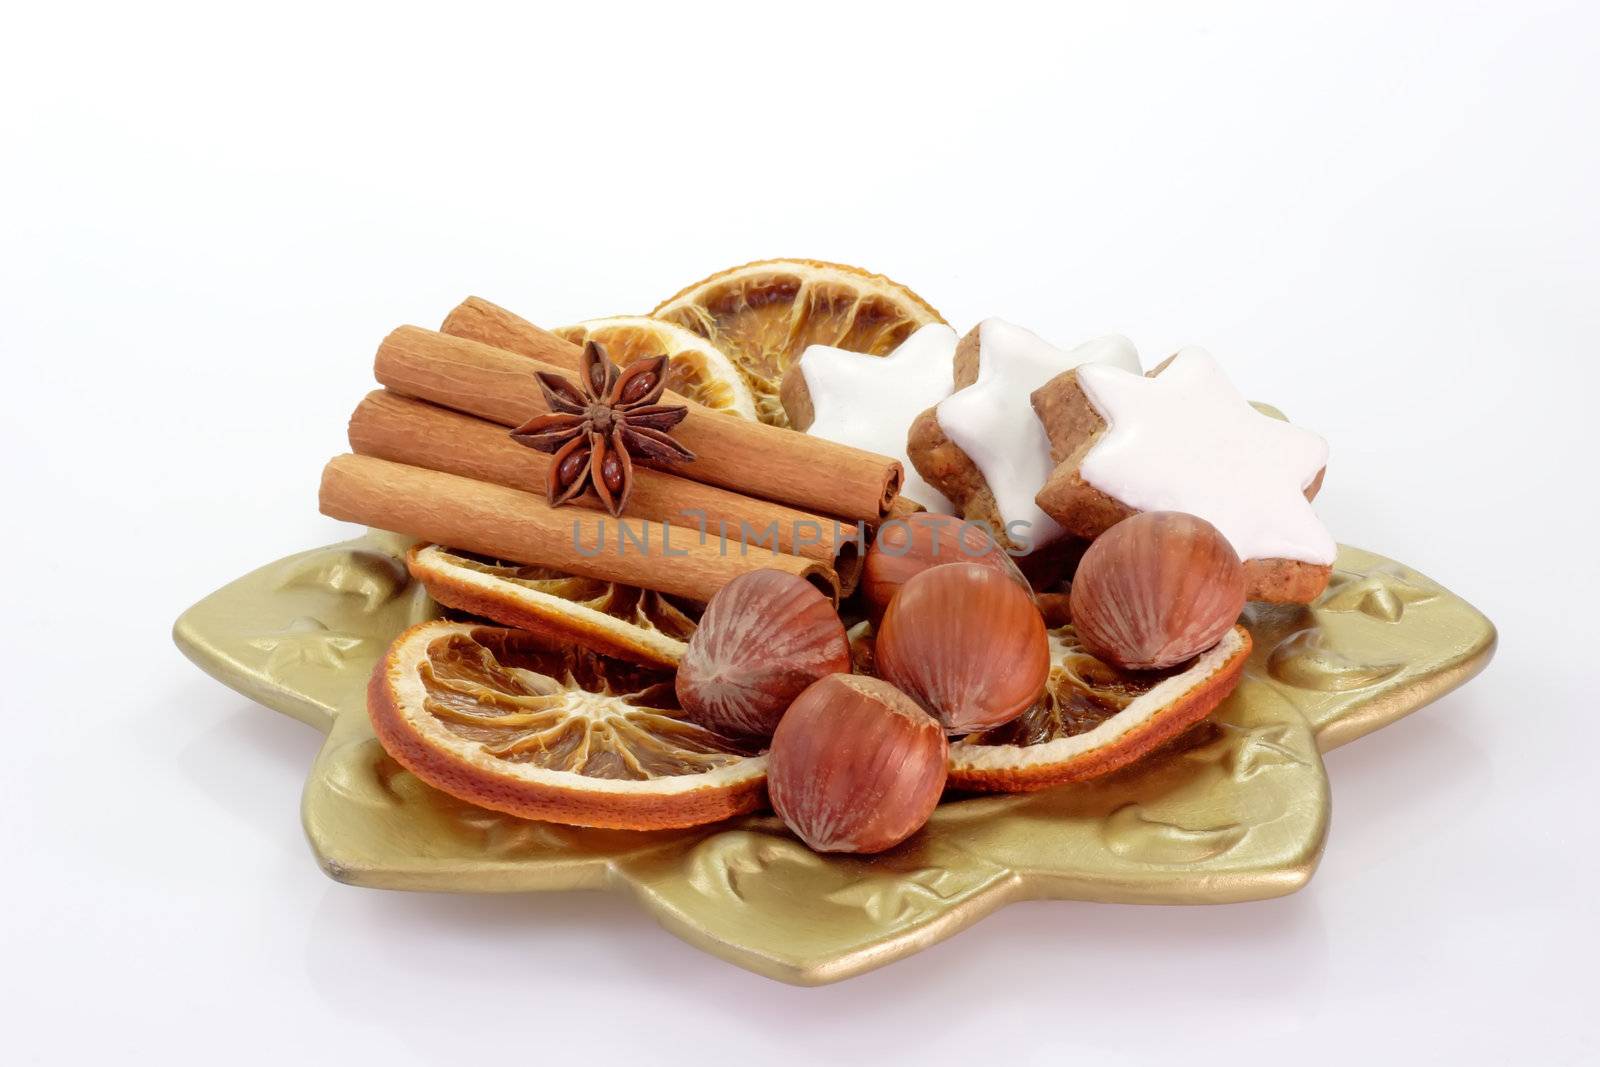 Golden plate with cookies, nuts, cinnamon sticks and dried orange slices